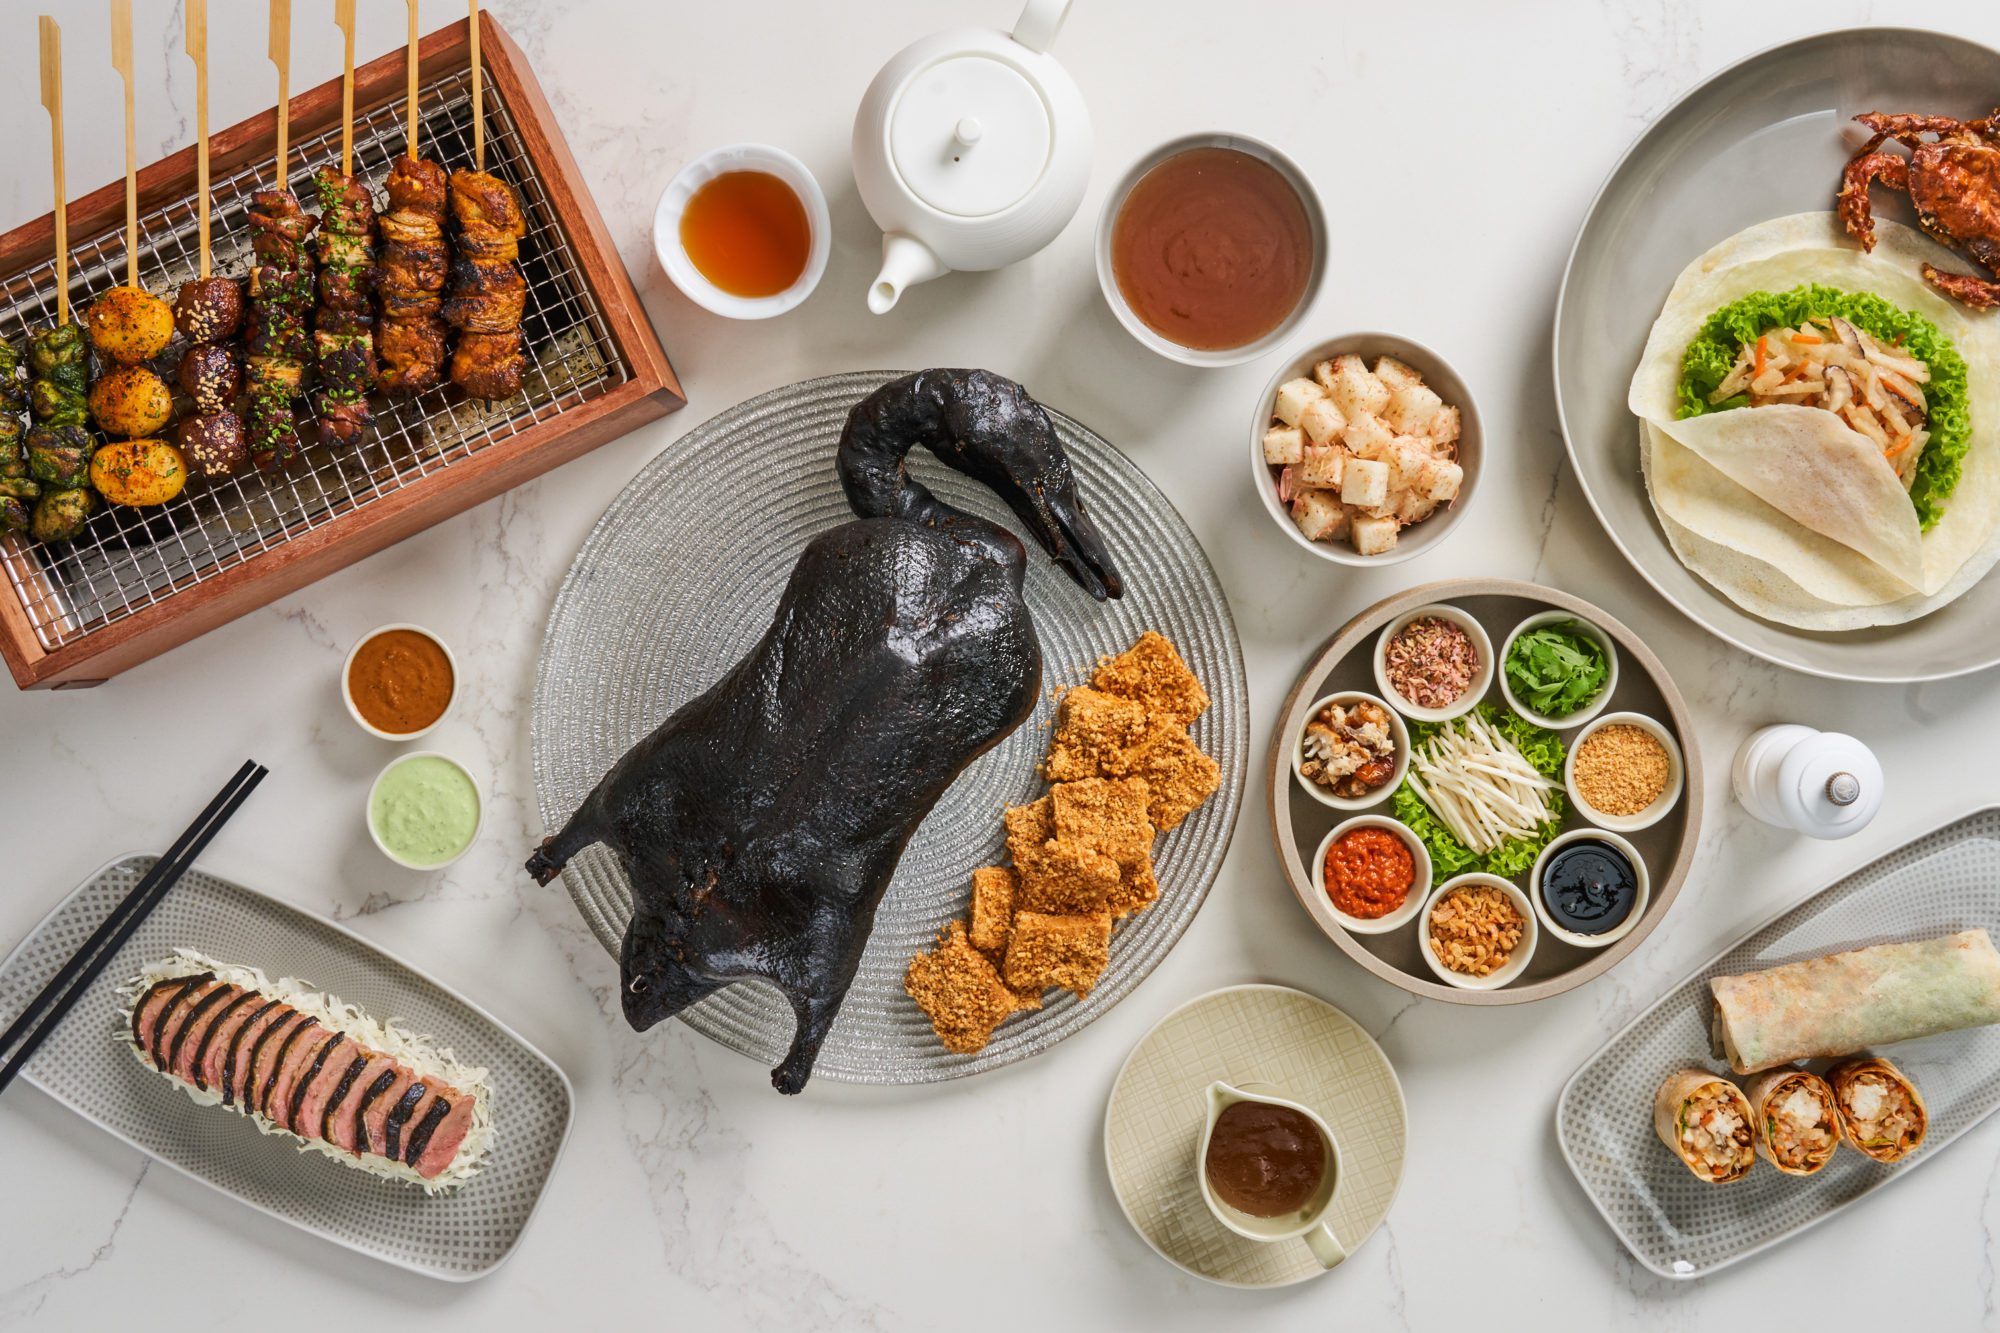 The Food-lover’s guide to Singapore